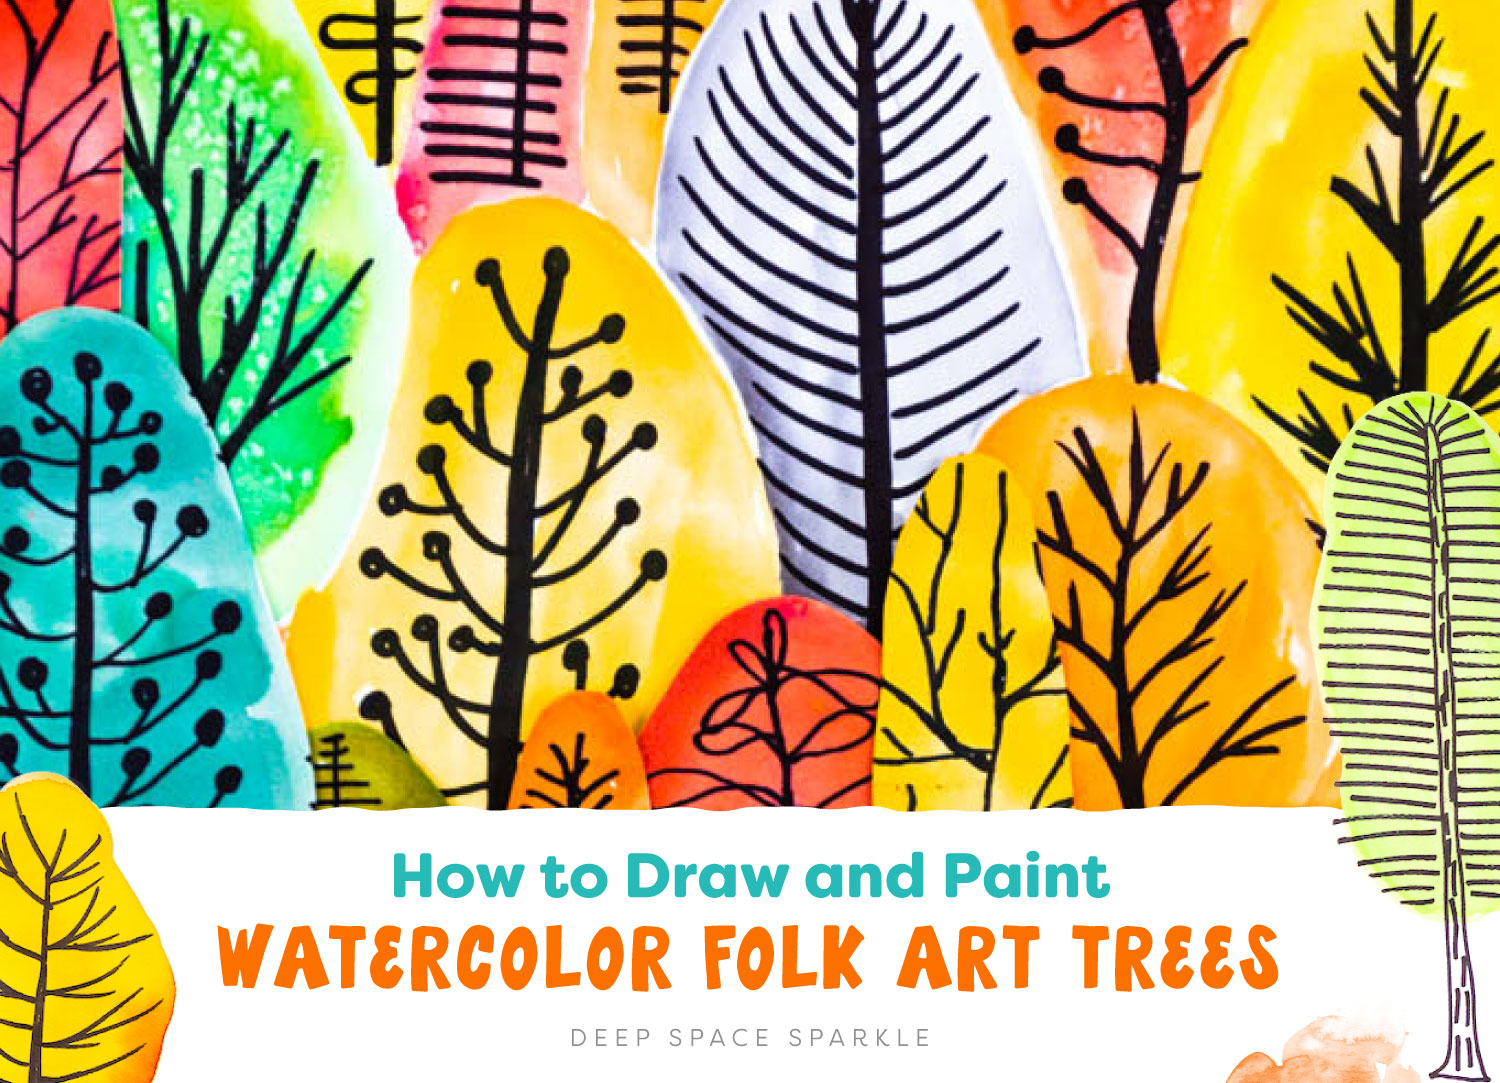 How to Draw and Paint Watercolor Folk Art Trees | Deep Space Sparkle